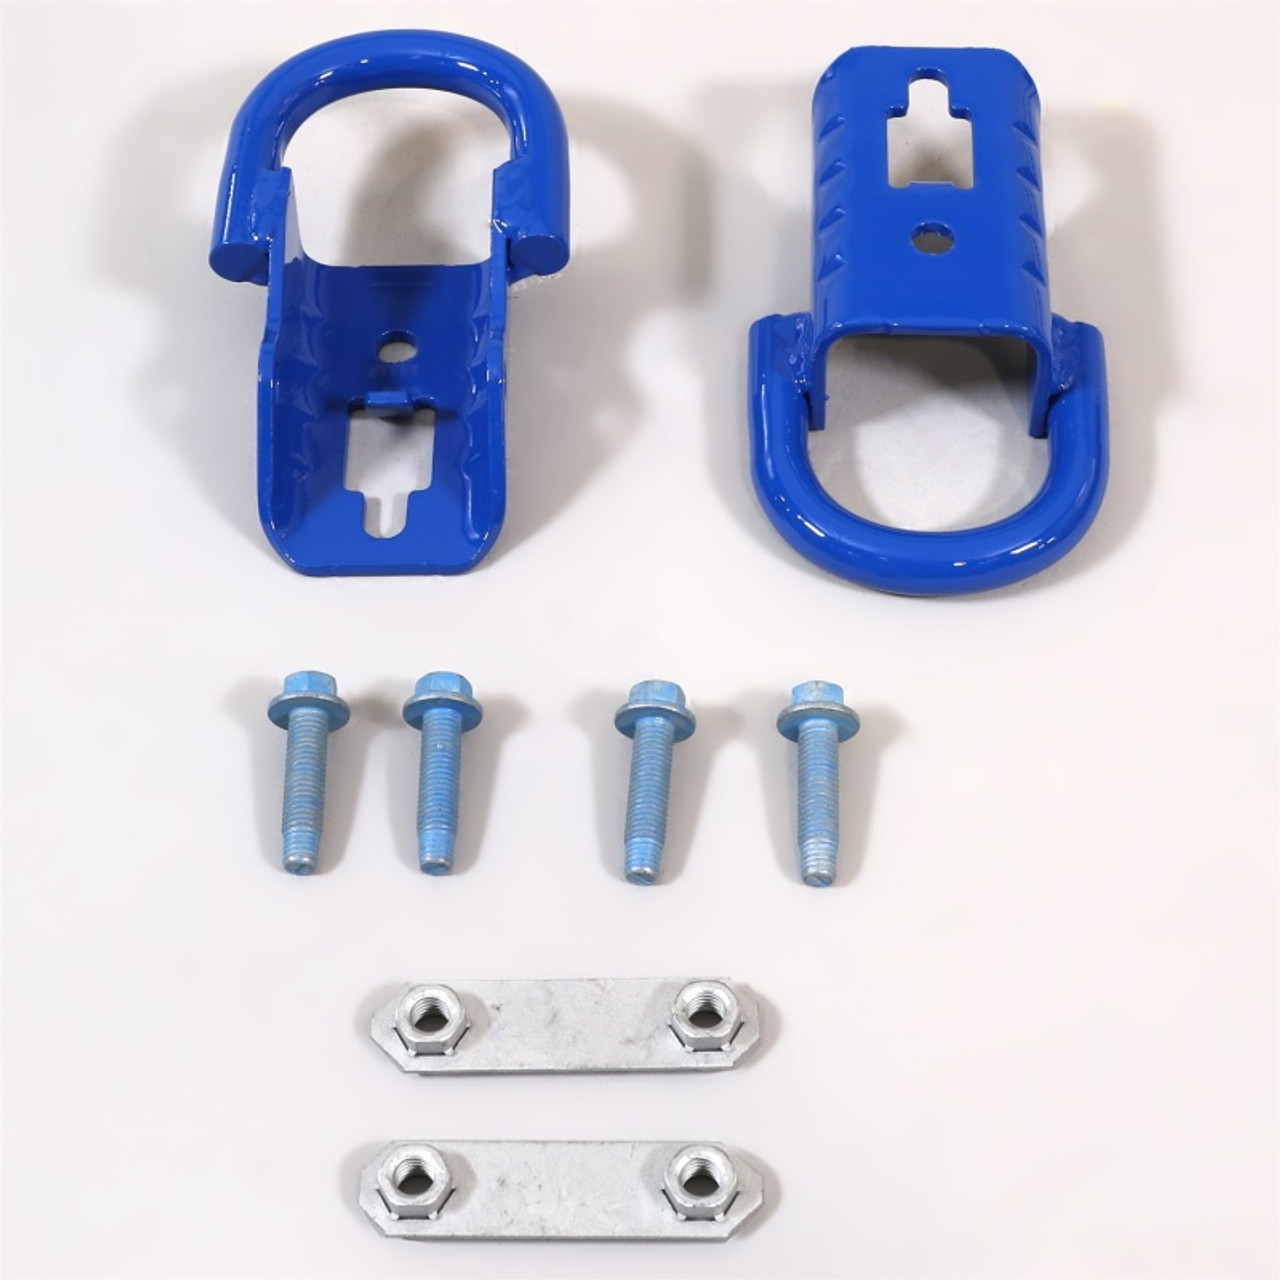 Ford Racing 17-22 Super Duty Tow Hooks - Blue (Pair)